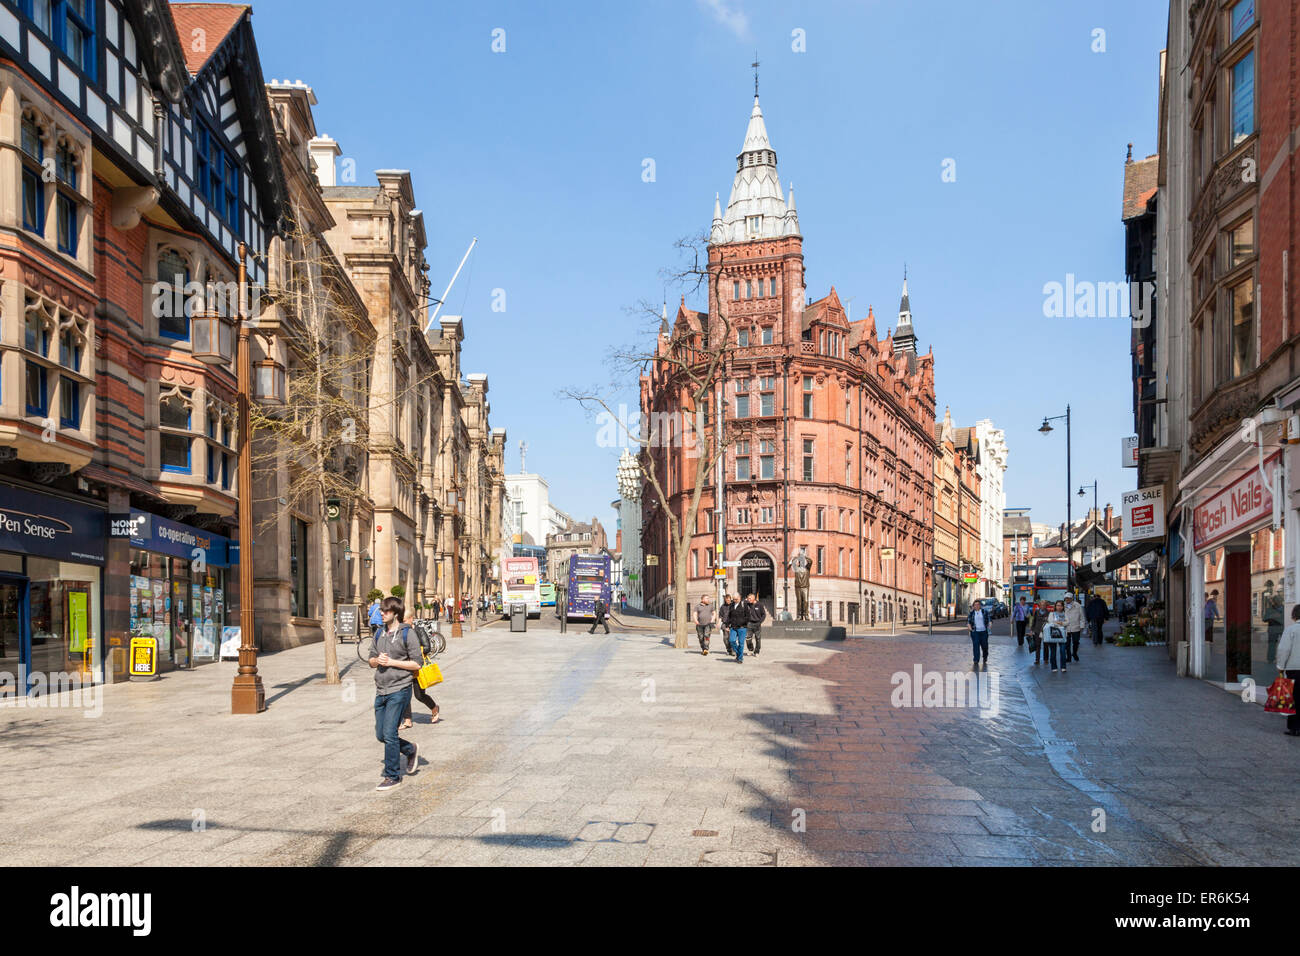 Queen Street and King Street in Nottingham city centre, divided by a grade 2 listed building designed by Fothergill Watson. Nottingham, England, UK. Stock Photo